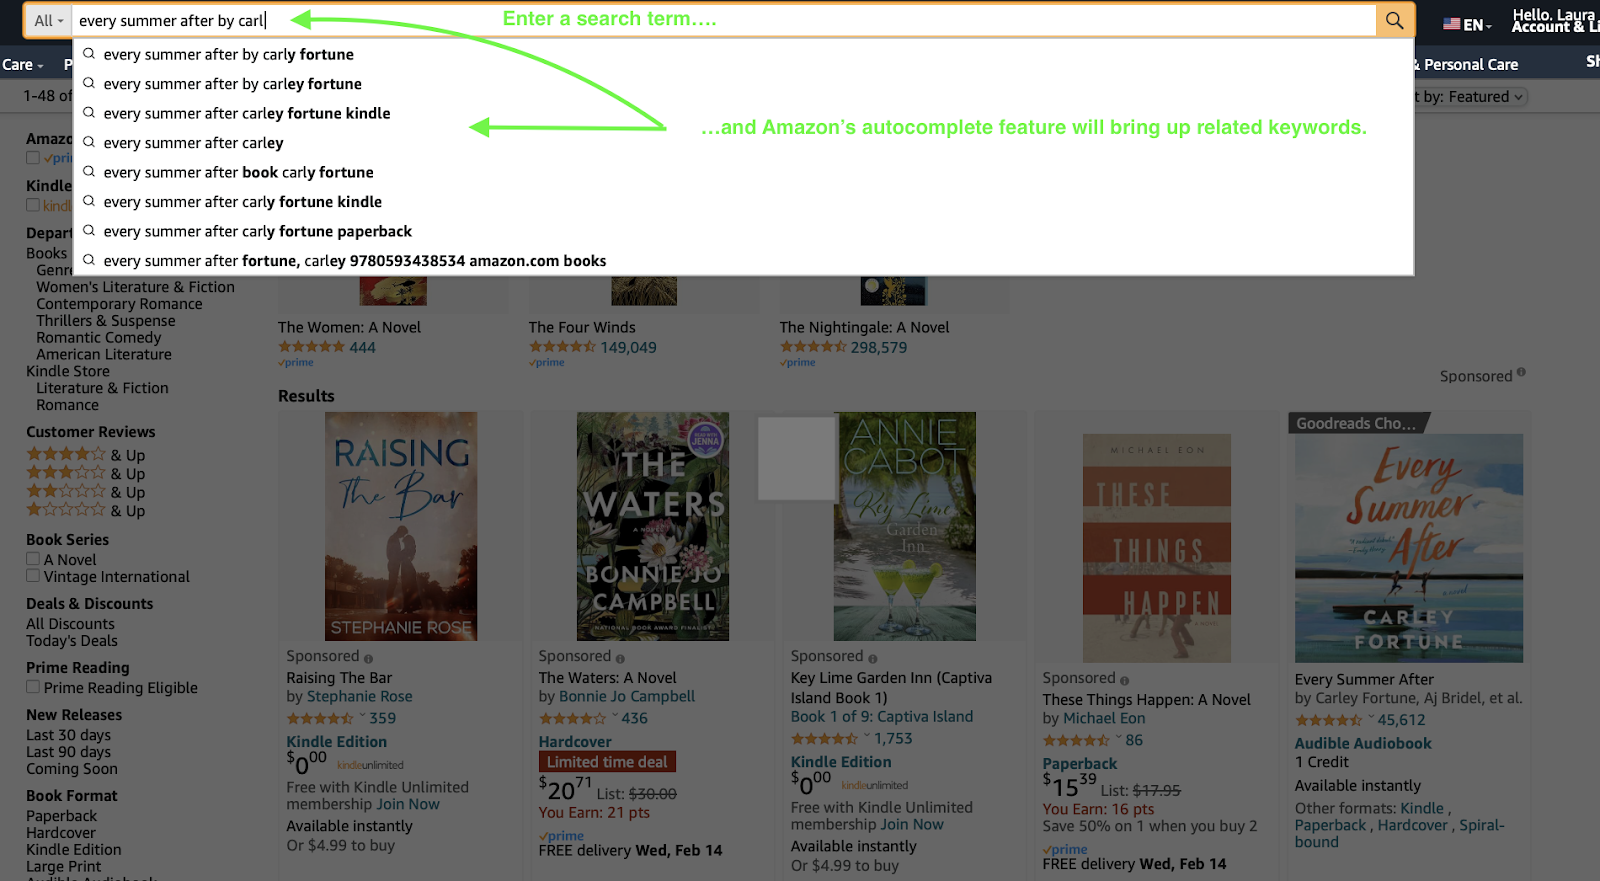 Screenshot of URLs on the Amazon search for "Every summer after by carl".
